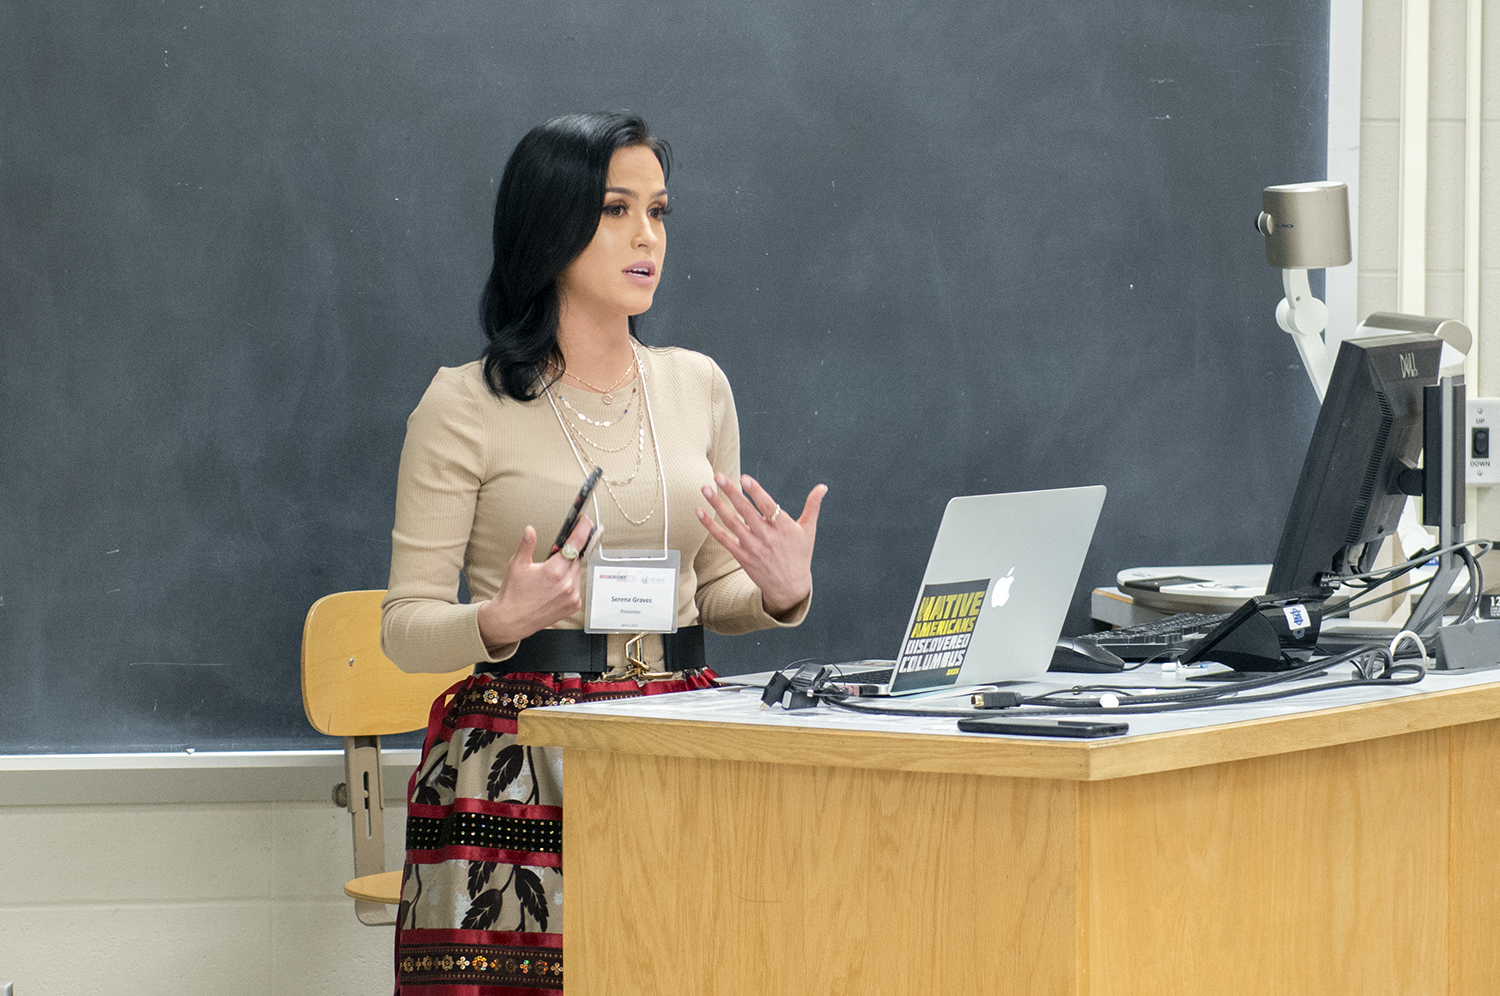 Serena Graves recently shared her knowledge of the Ojibwe language with others at the university’s 20th Annual Student Achievement Conference.